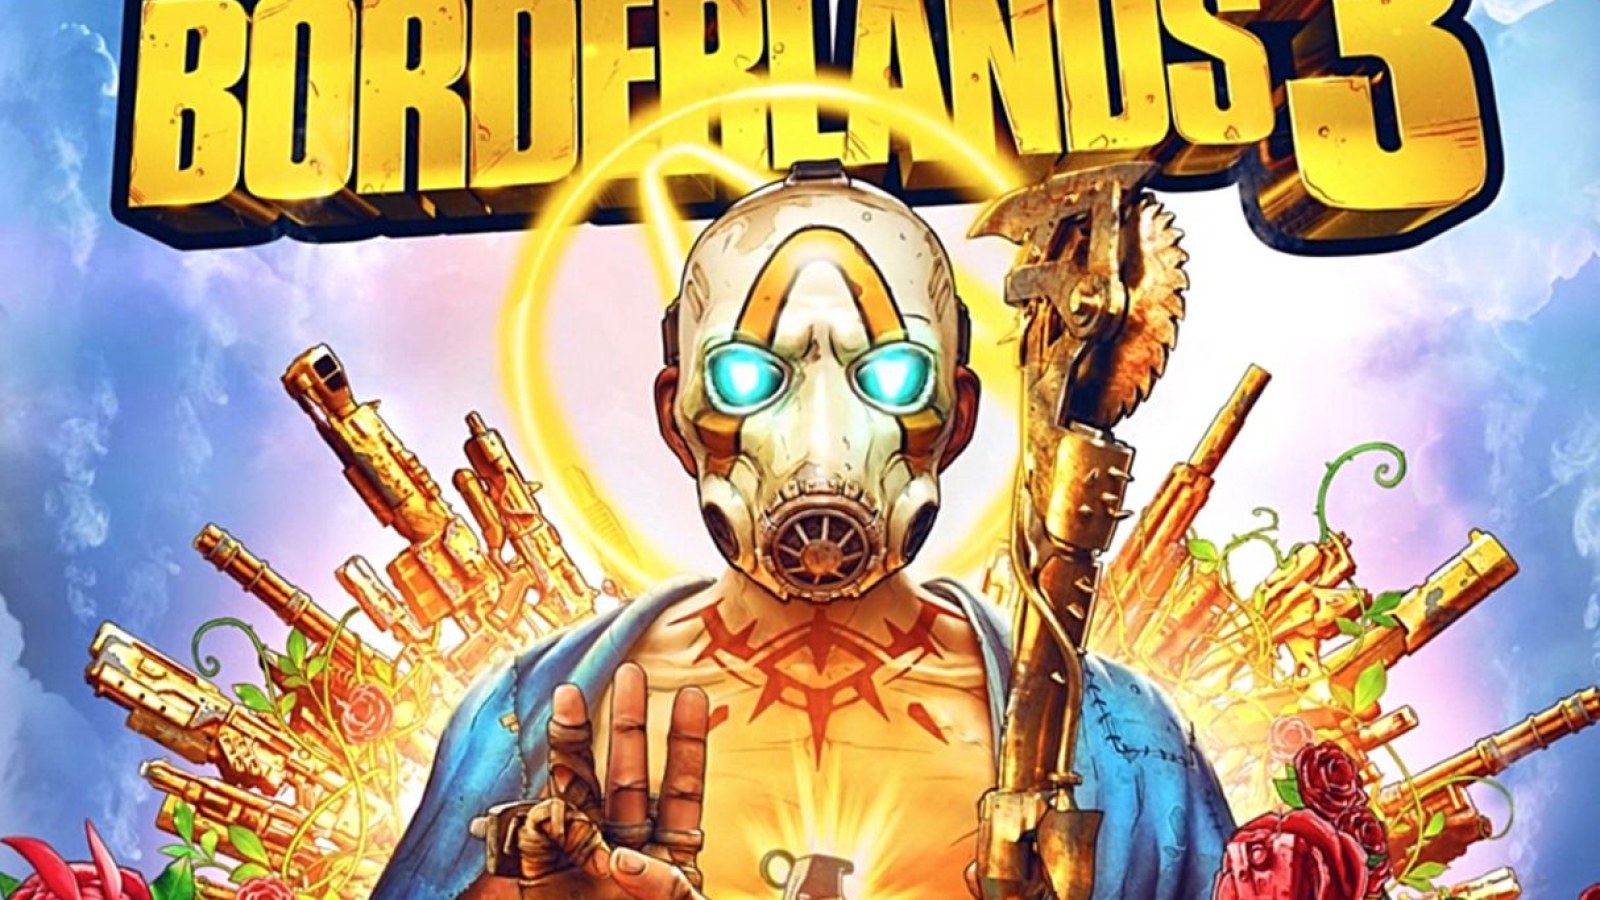 Borderlands 3 Multiplayer Features Split Screen Crossplay Couch Co Op Improvements And More